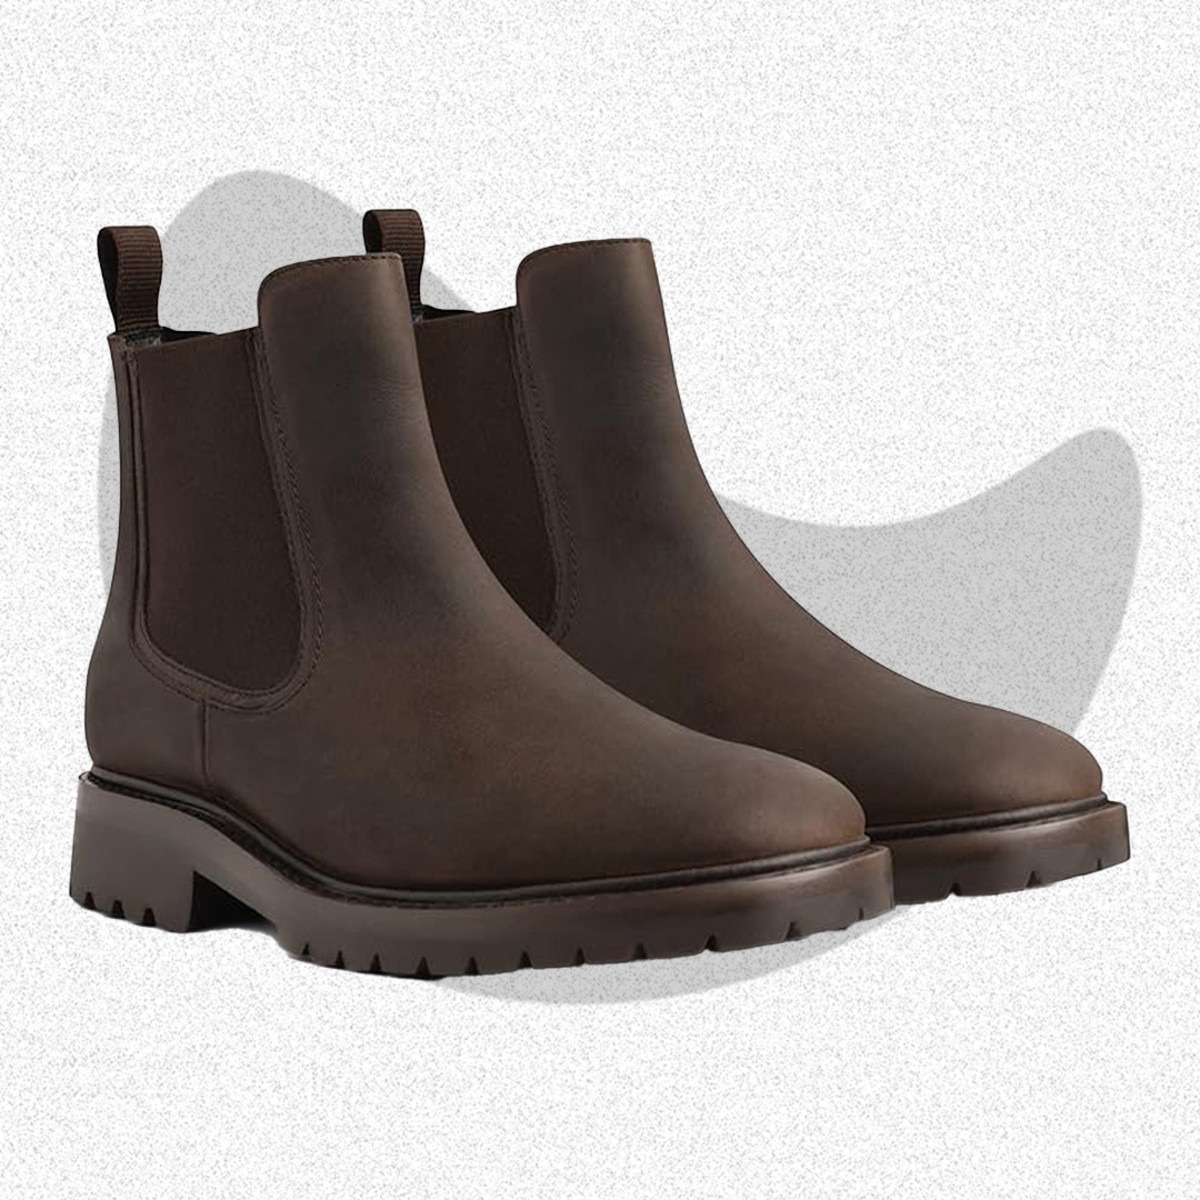 Styling Chelsea boots the right way » Here's how | legero